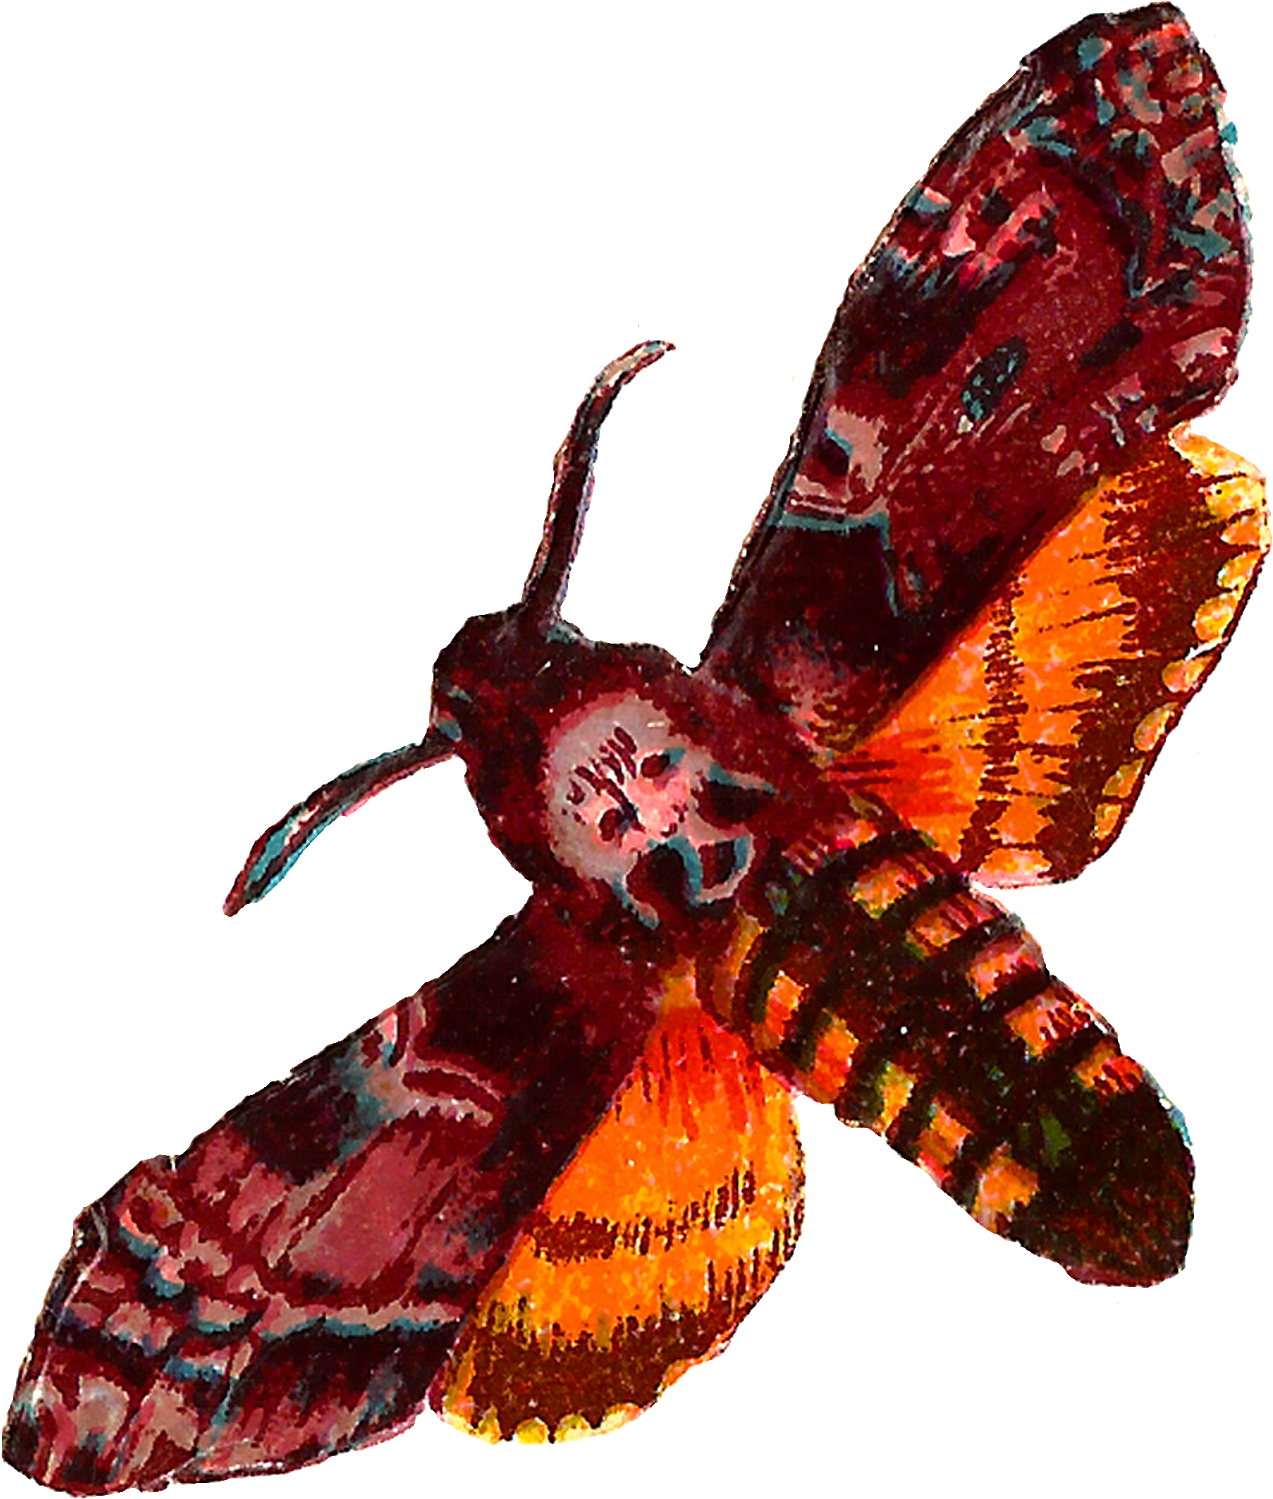 The Second Digital Moth Clip Art Is Of The Death's - Death Head Moth .png (1368x1600)